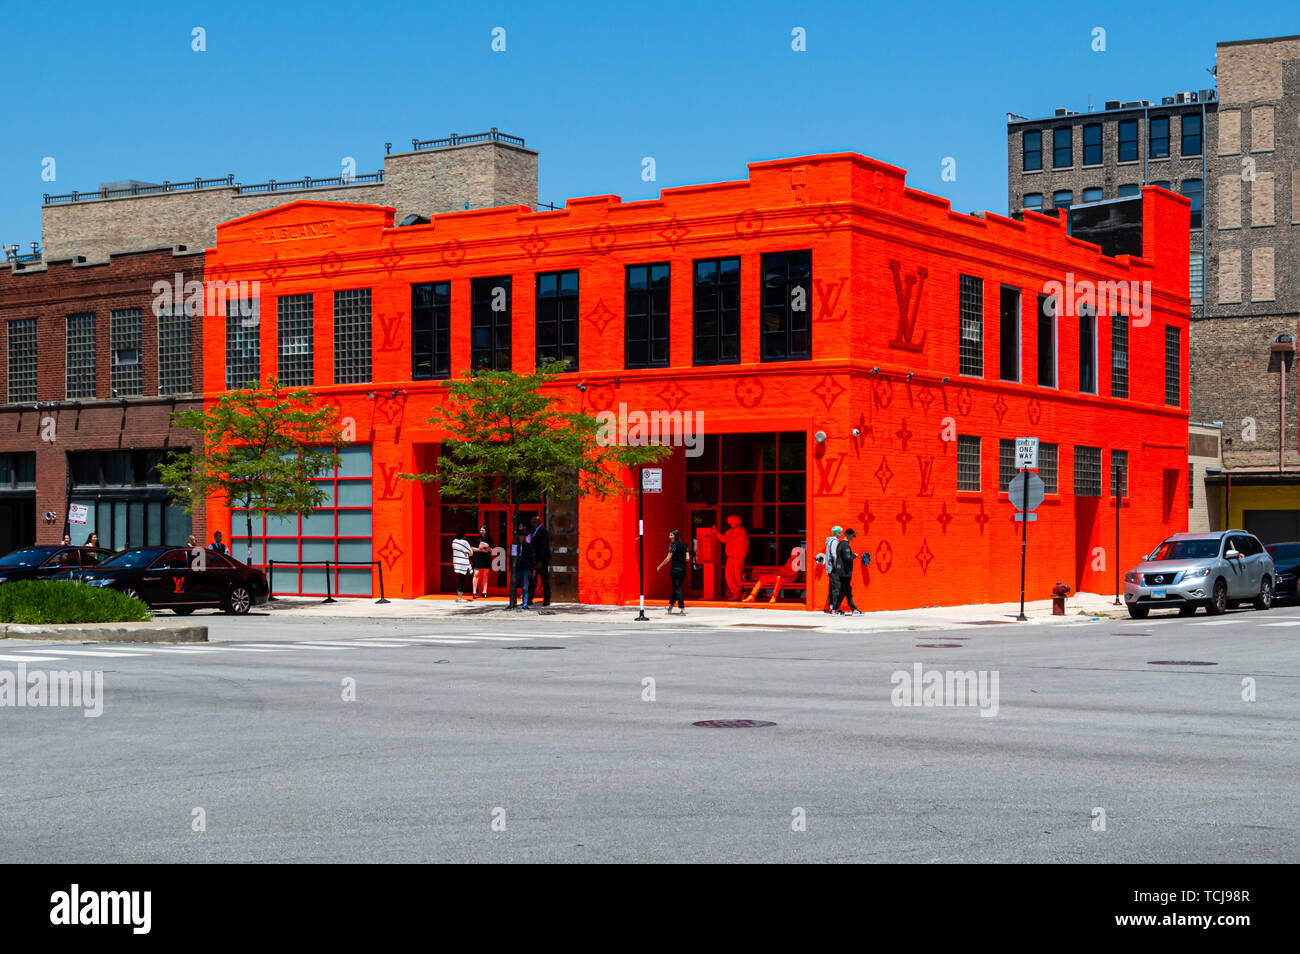 West Loop, Chicago-June 7, 2019: A Louis Vuitton pop-up retail store on the Near West Side of the city is painted neon orange. Stock Photo